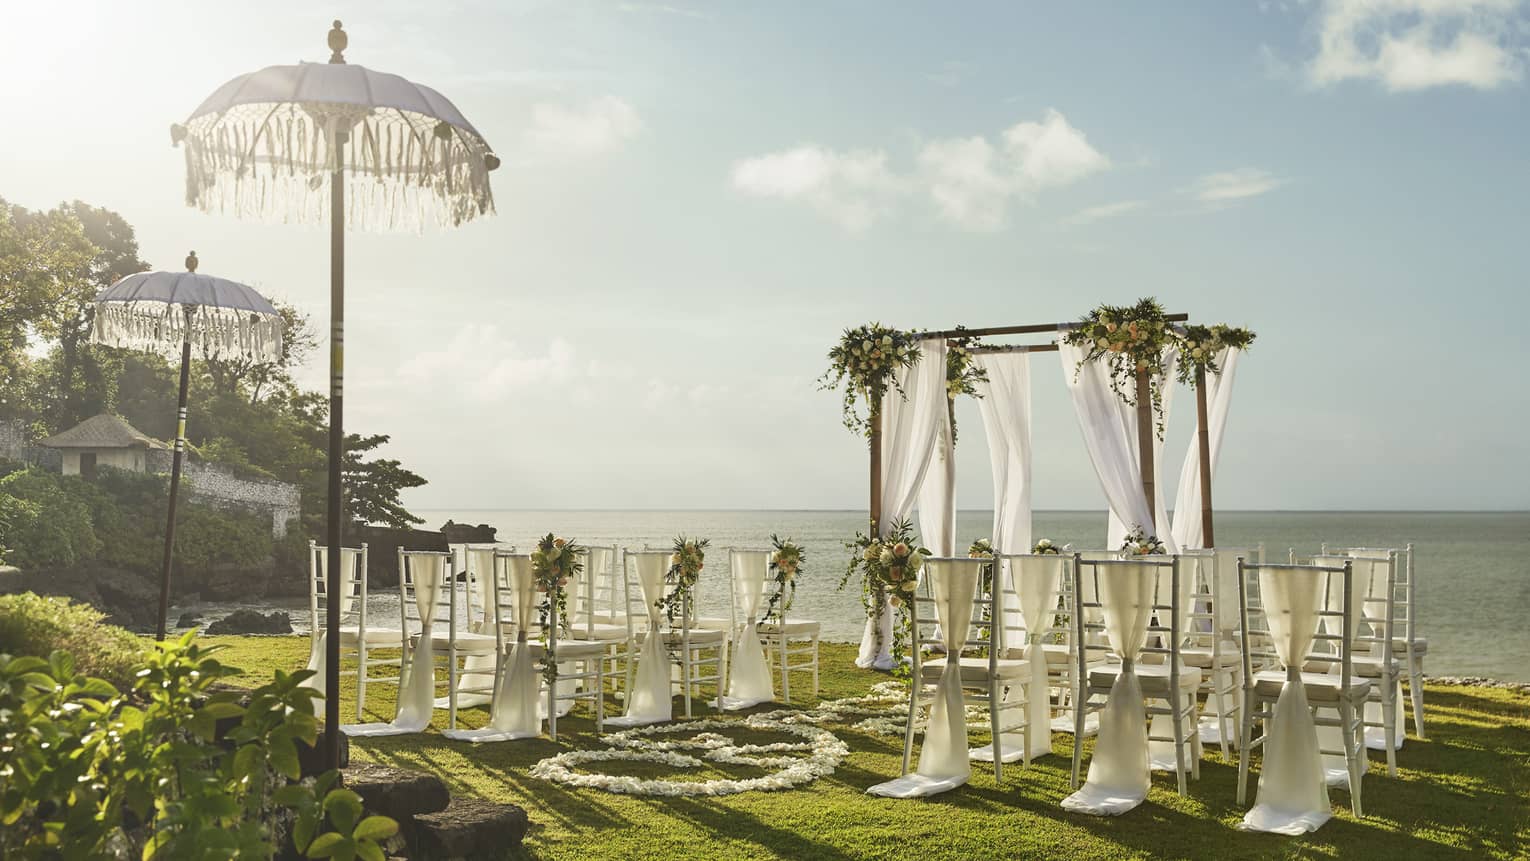 Sun shines over wedding altar draped in white fabric, rows of chairs overlooking ocean